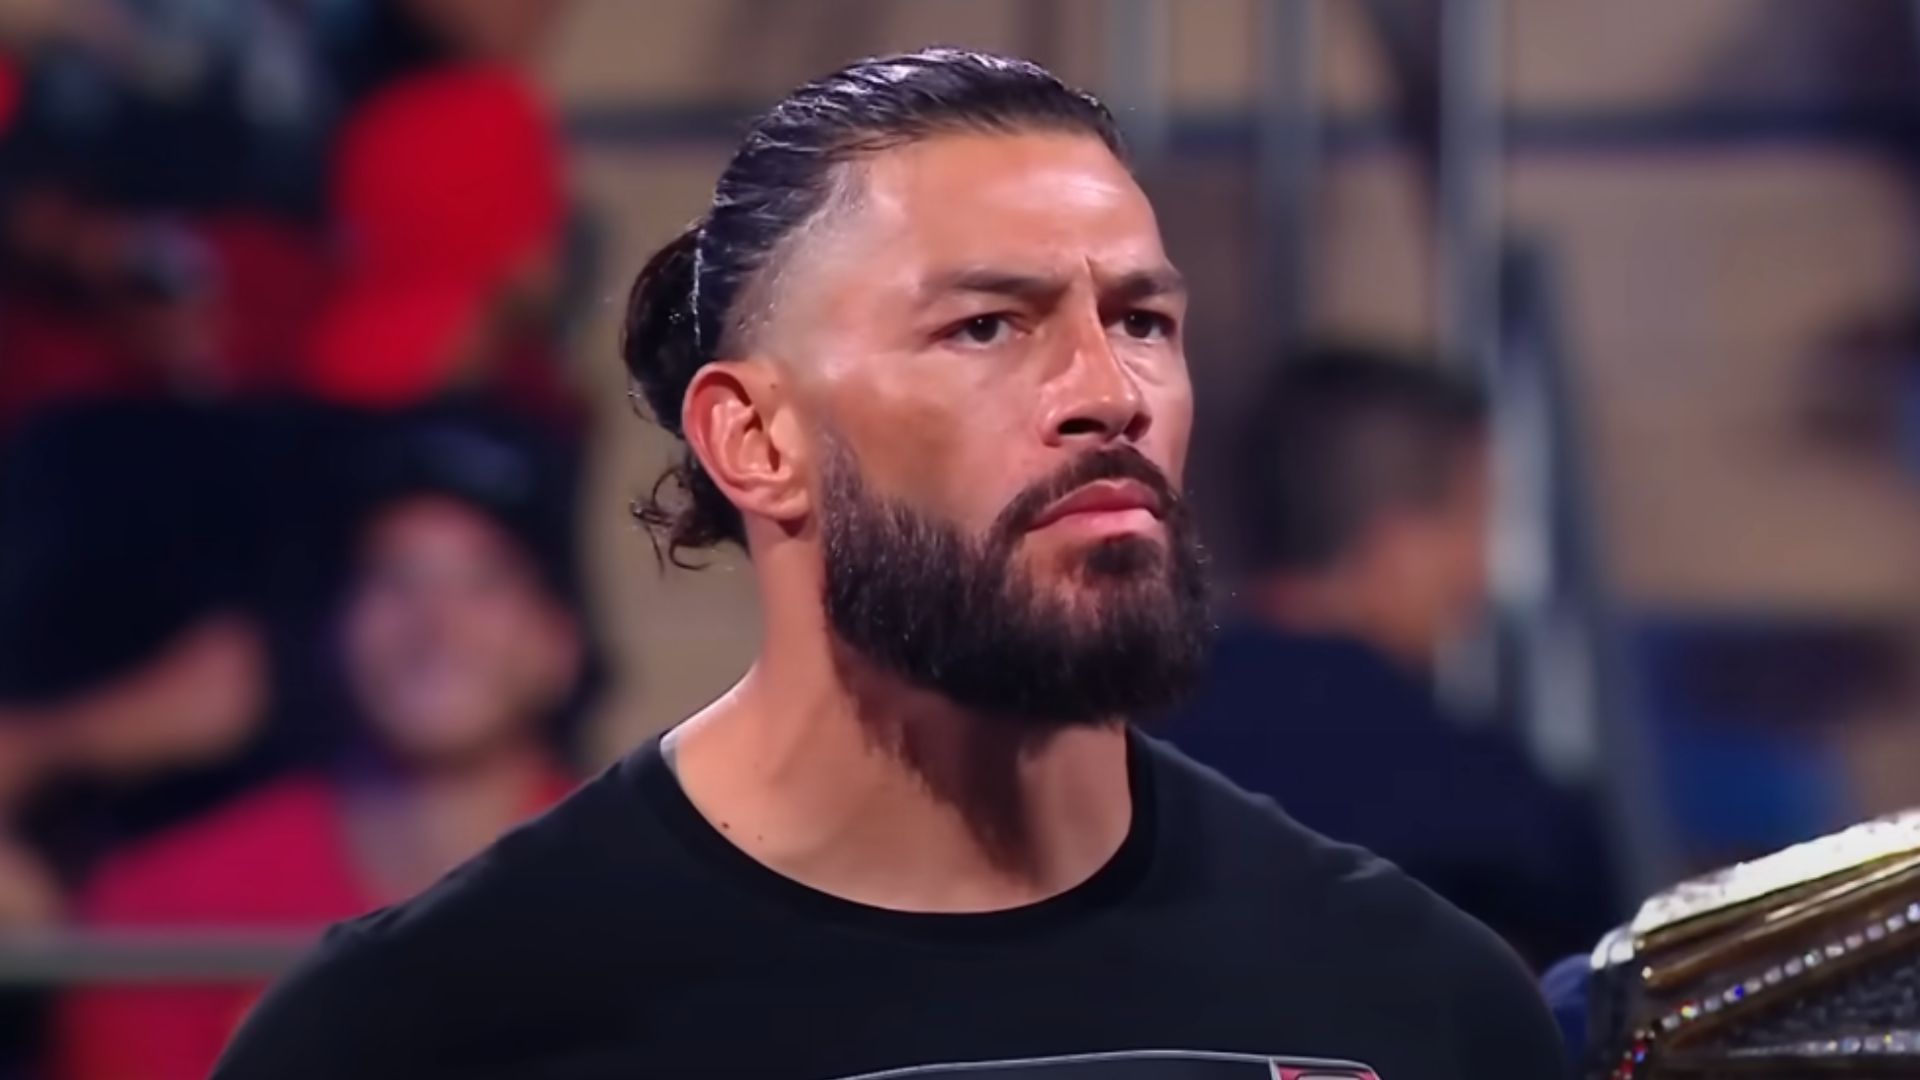 Roman Reigns is nicknamed The Tribal Chief